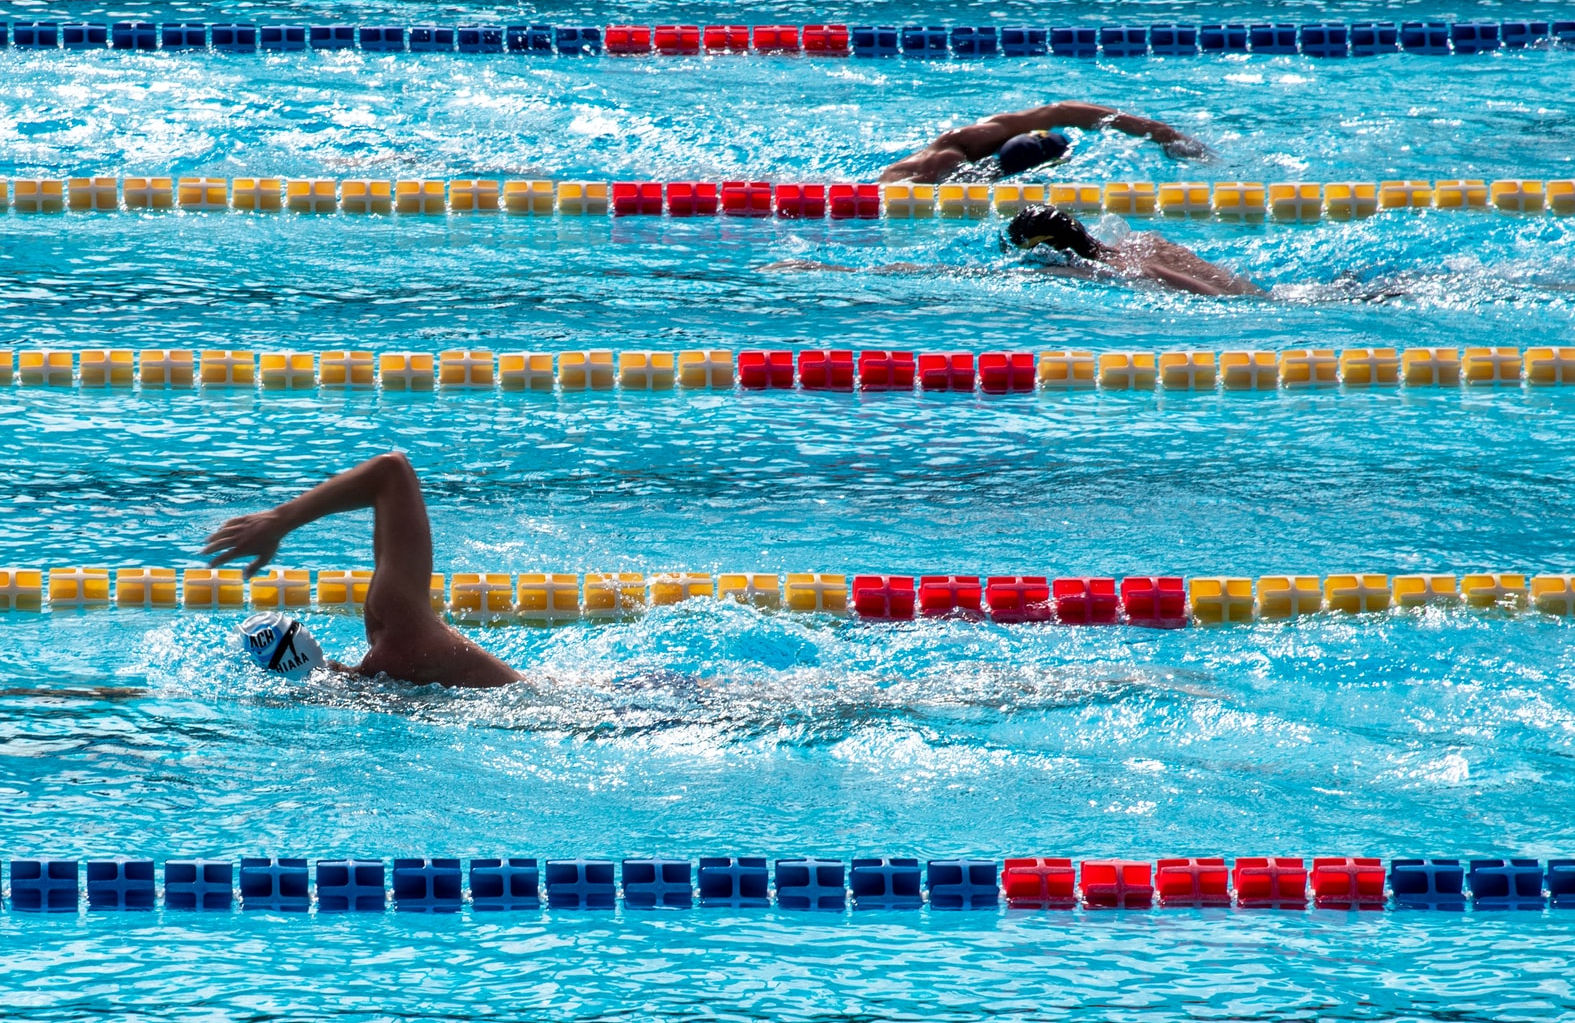 swimmers in lanes of a swimming pool